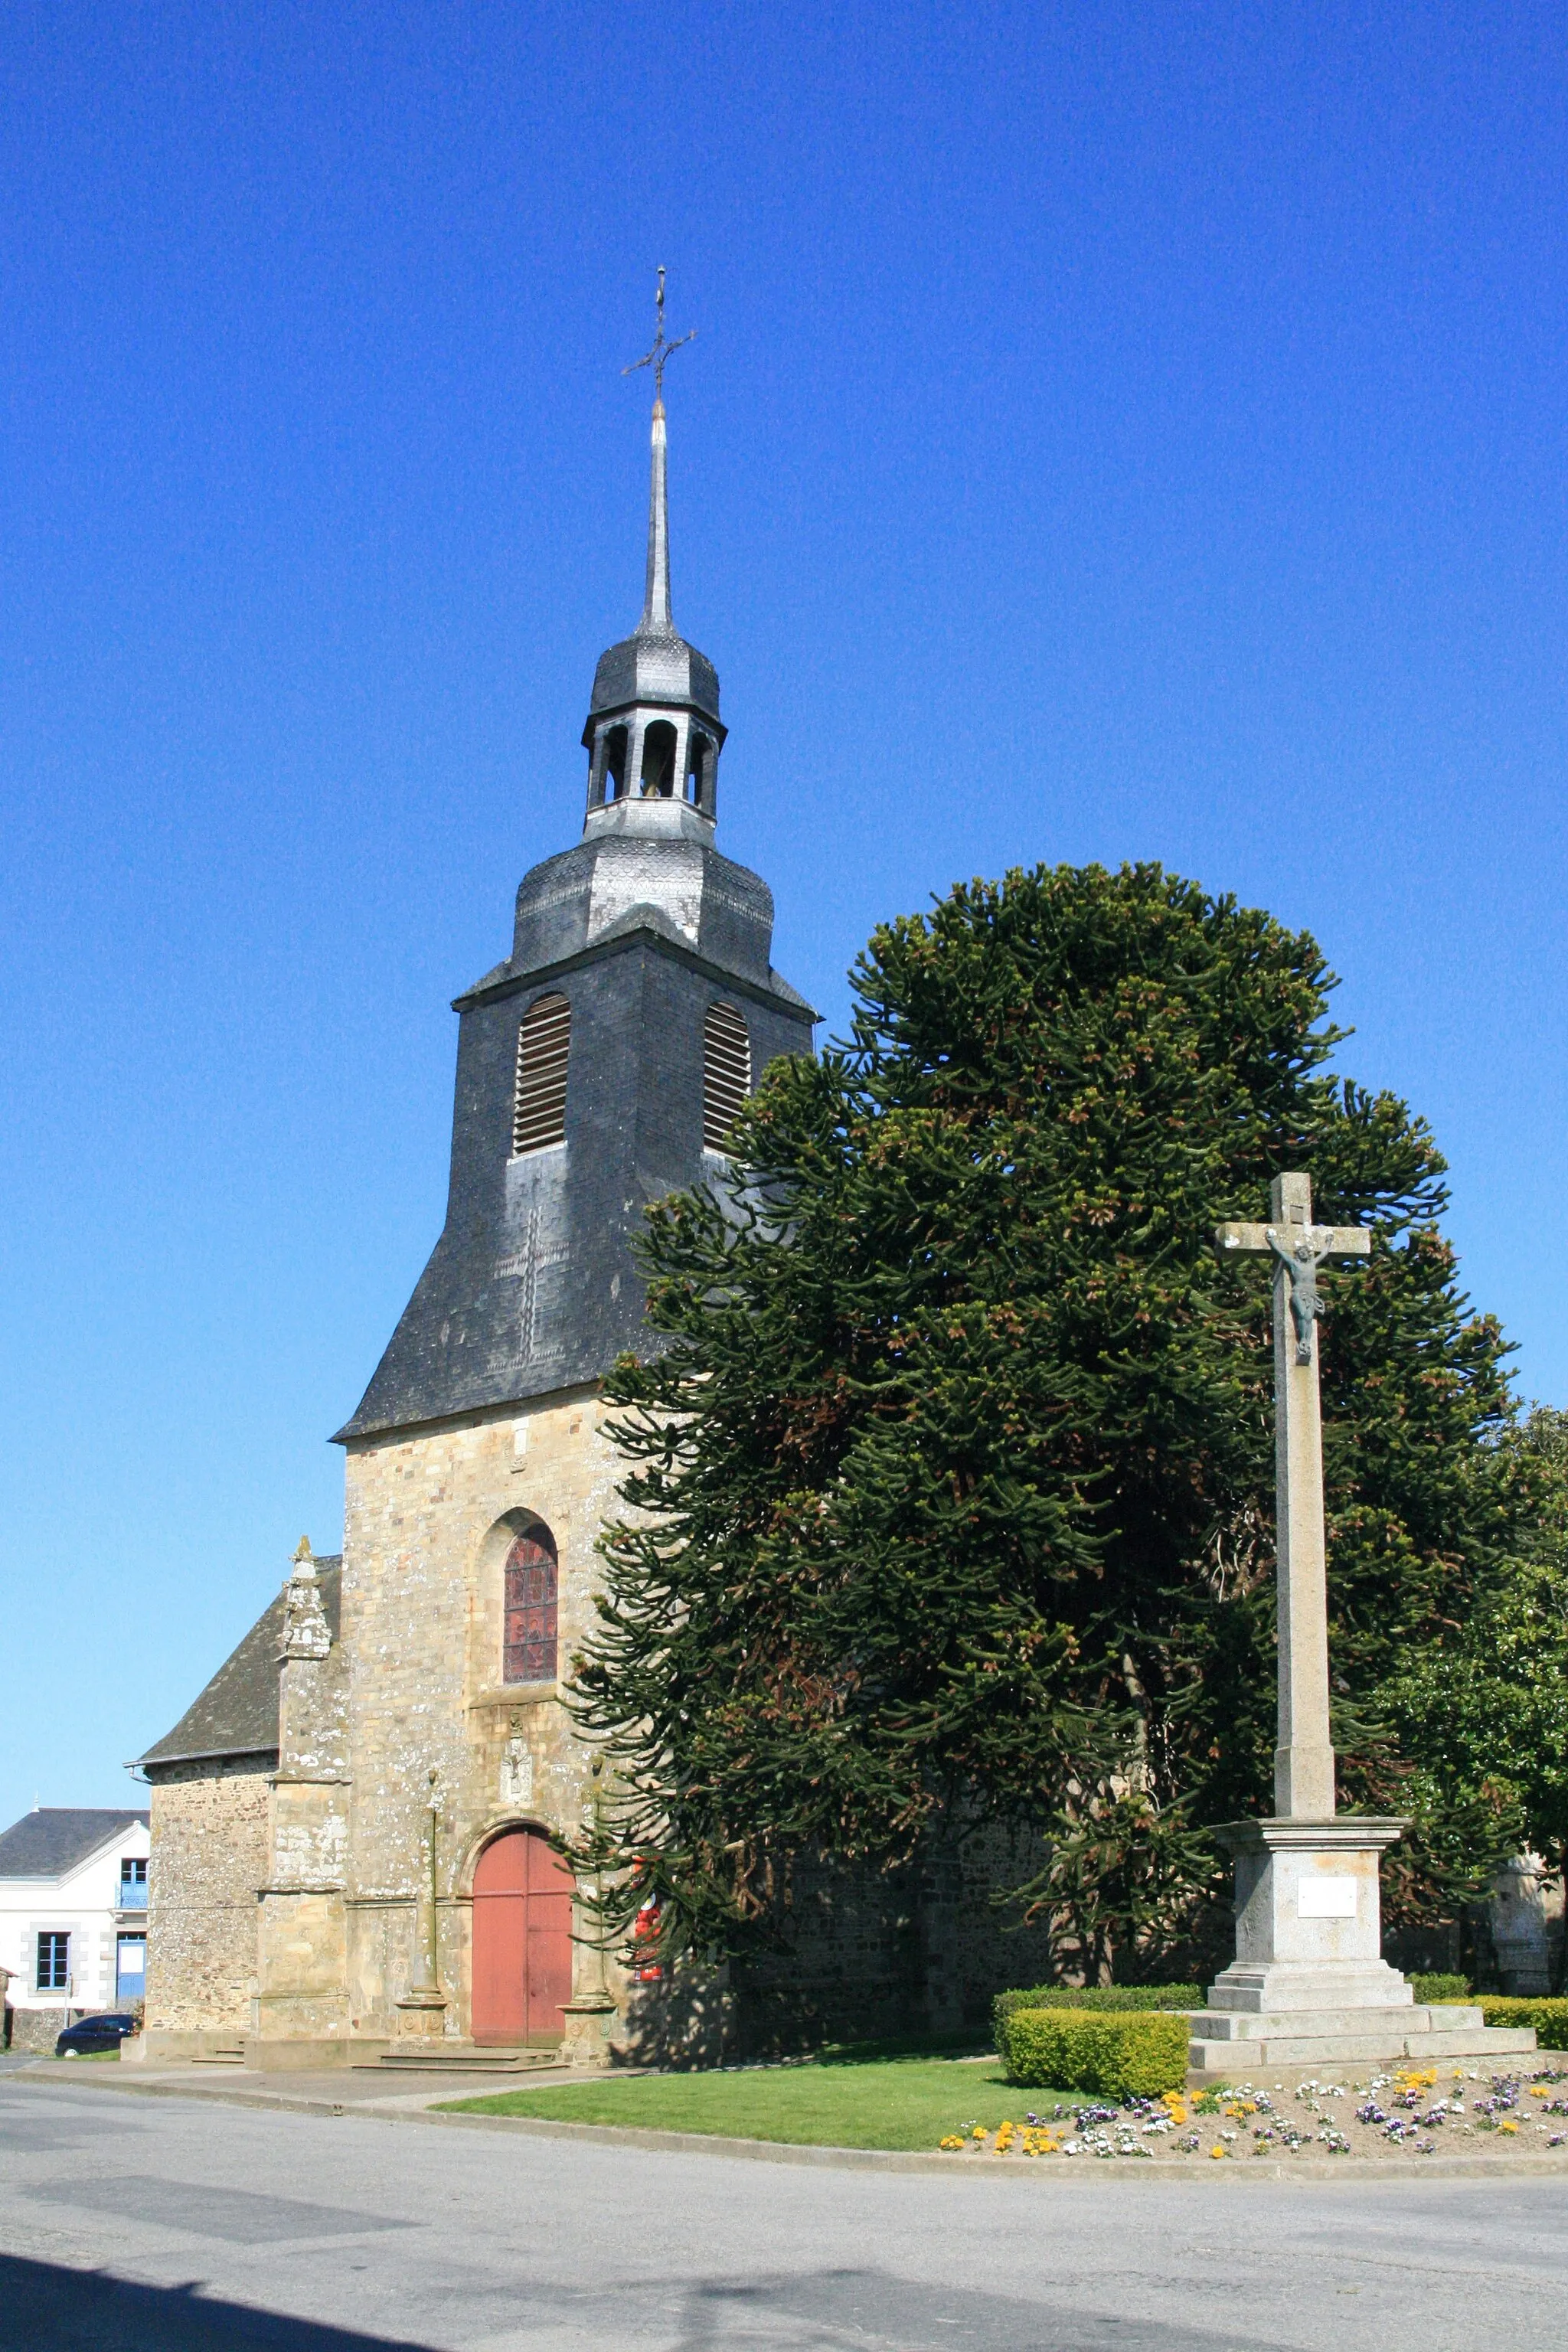 Photo showing: St Peter's church, village of Visseiche, department of Ille-et-Vilaine, Brittany, France.
Roman church, with 16th and 17th centuries parts.